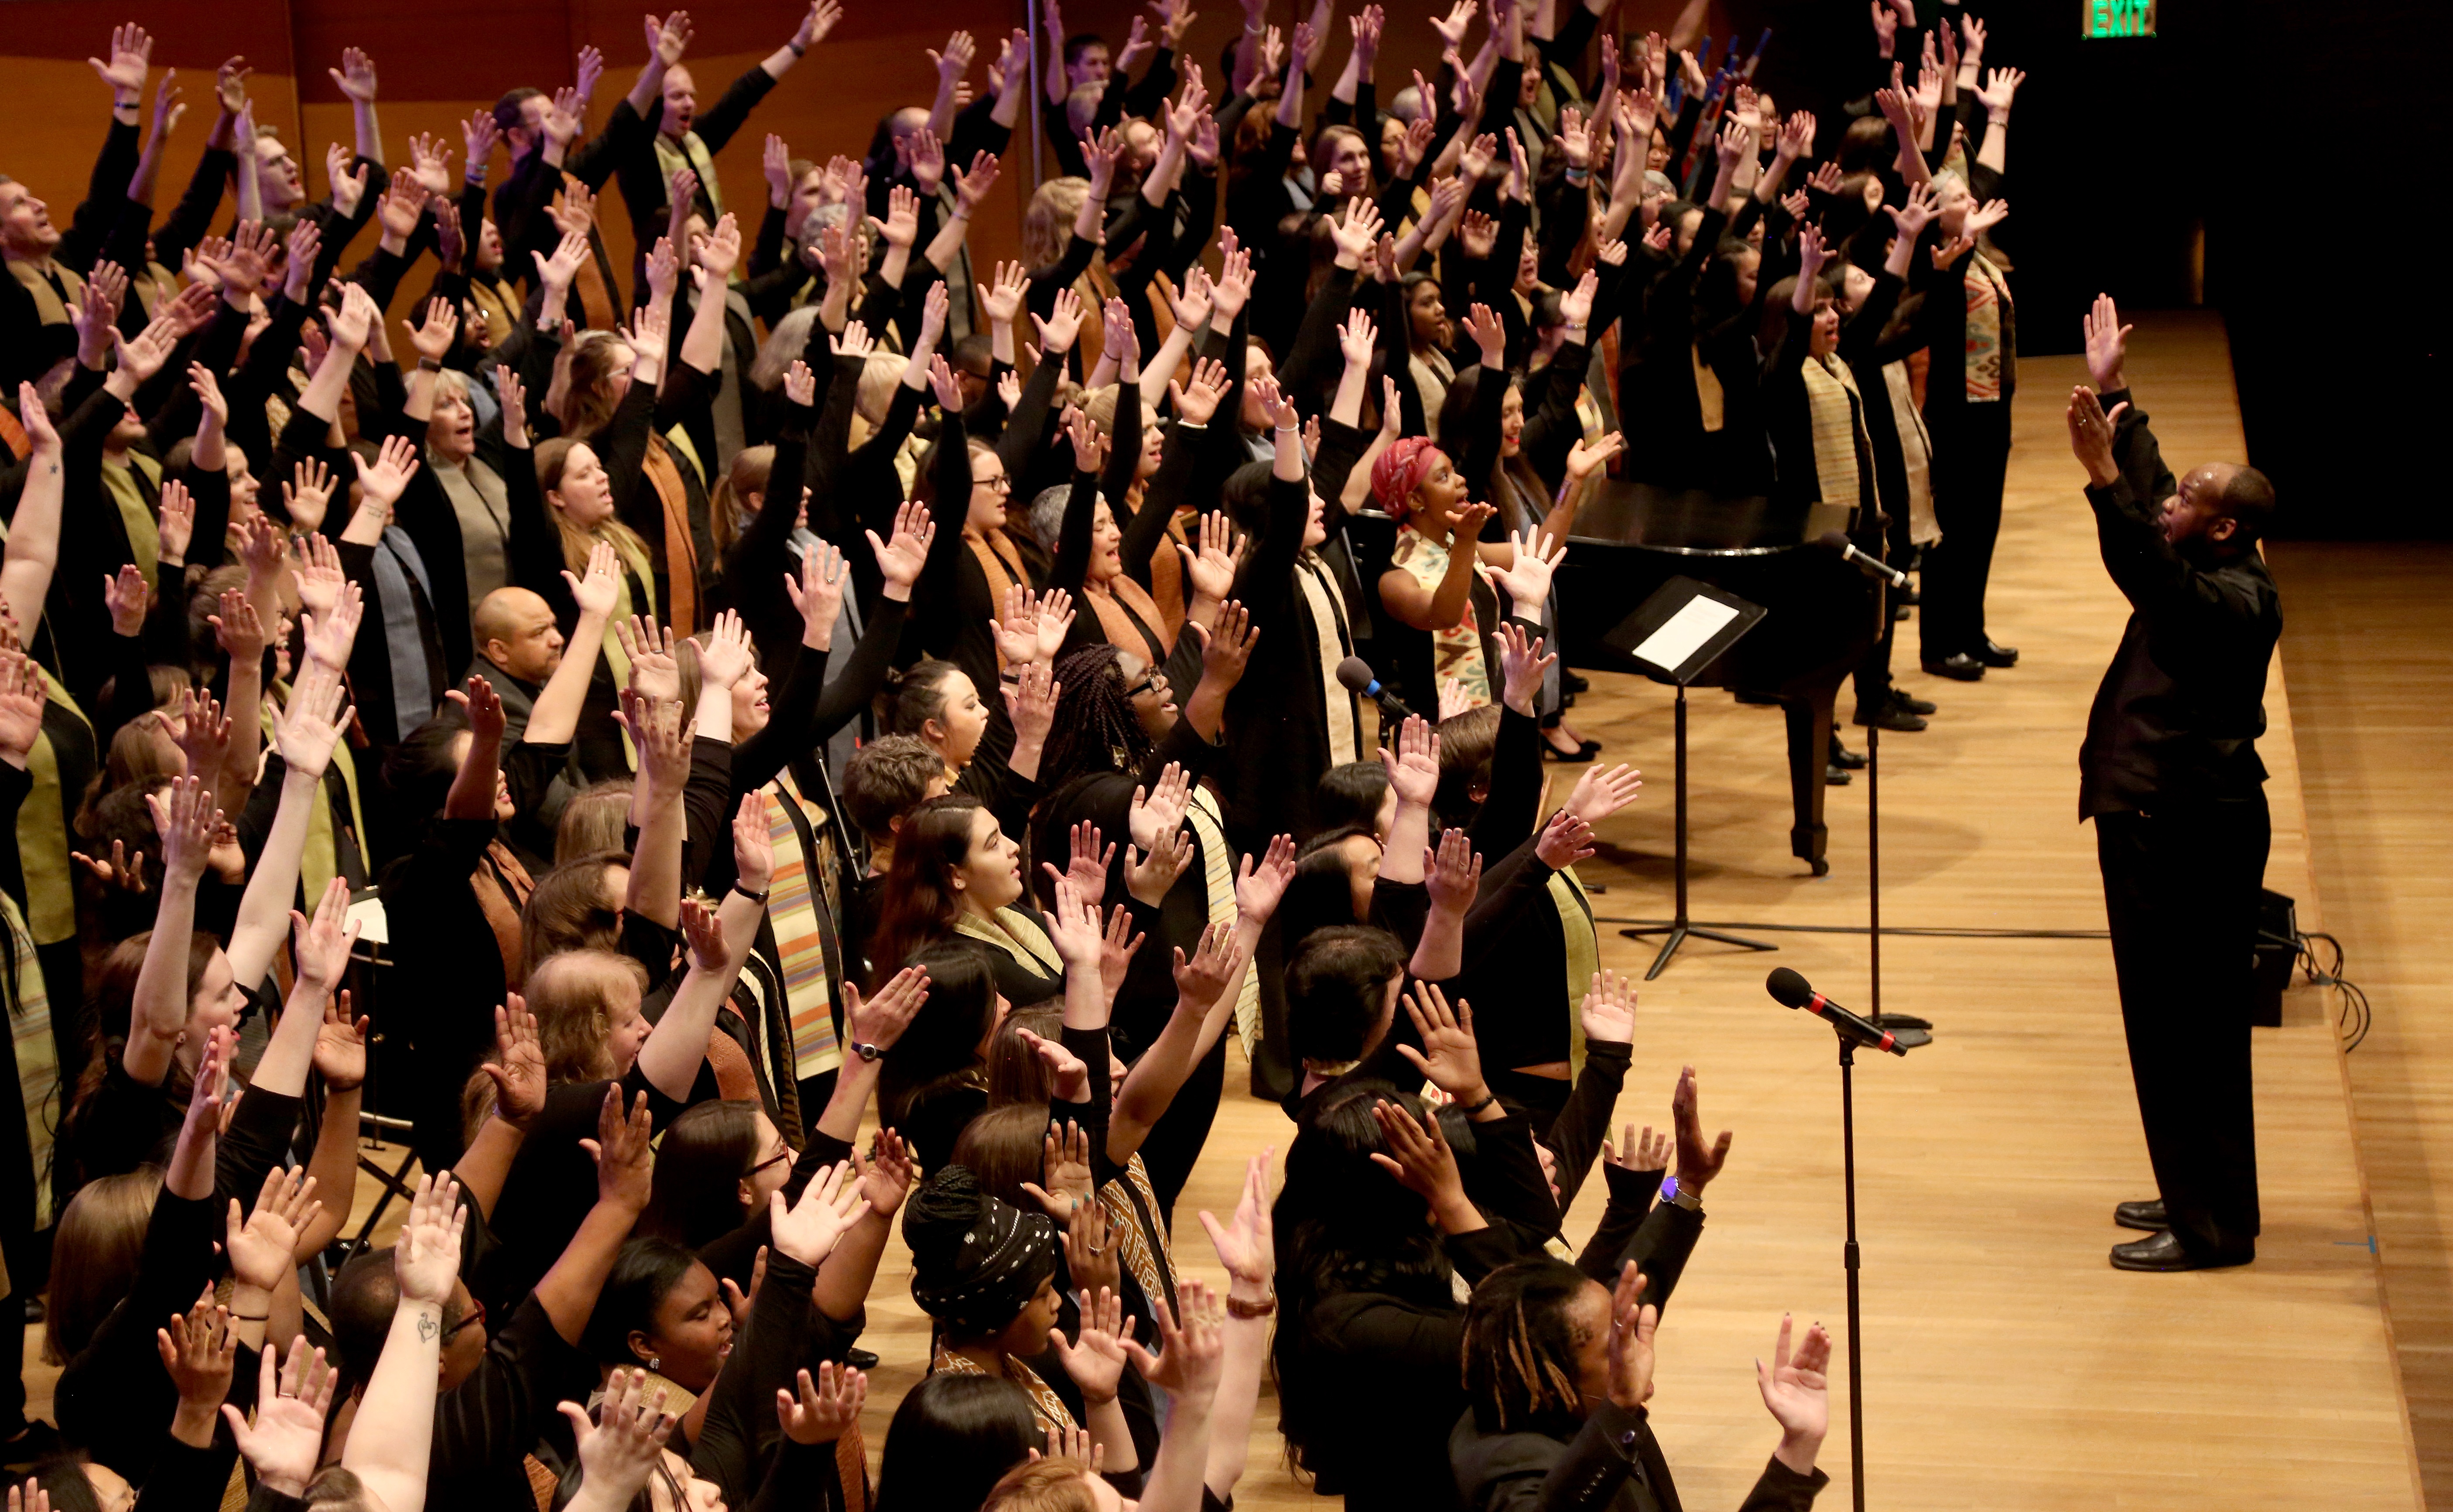 Singers with their hands in there air, Photo Credit: Kyndell Harkness